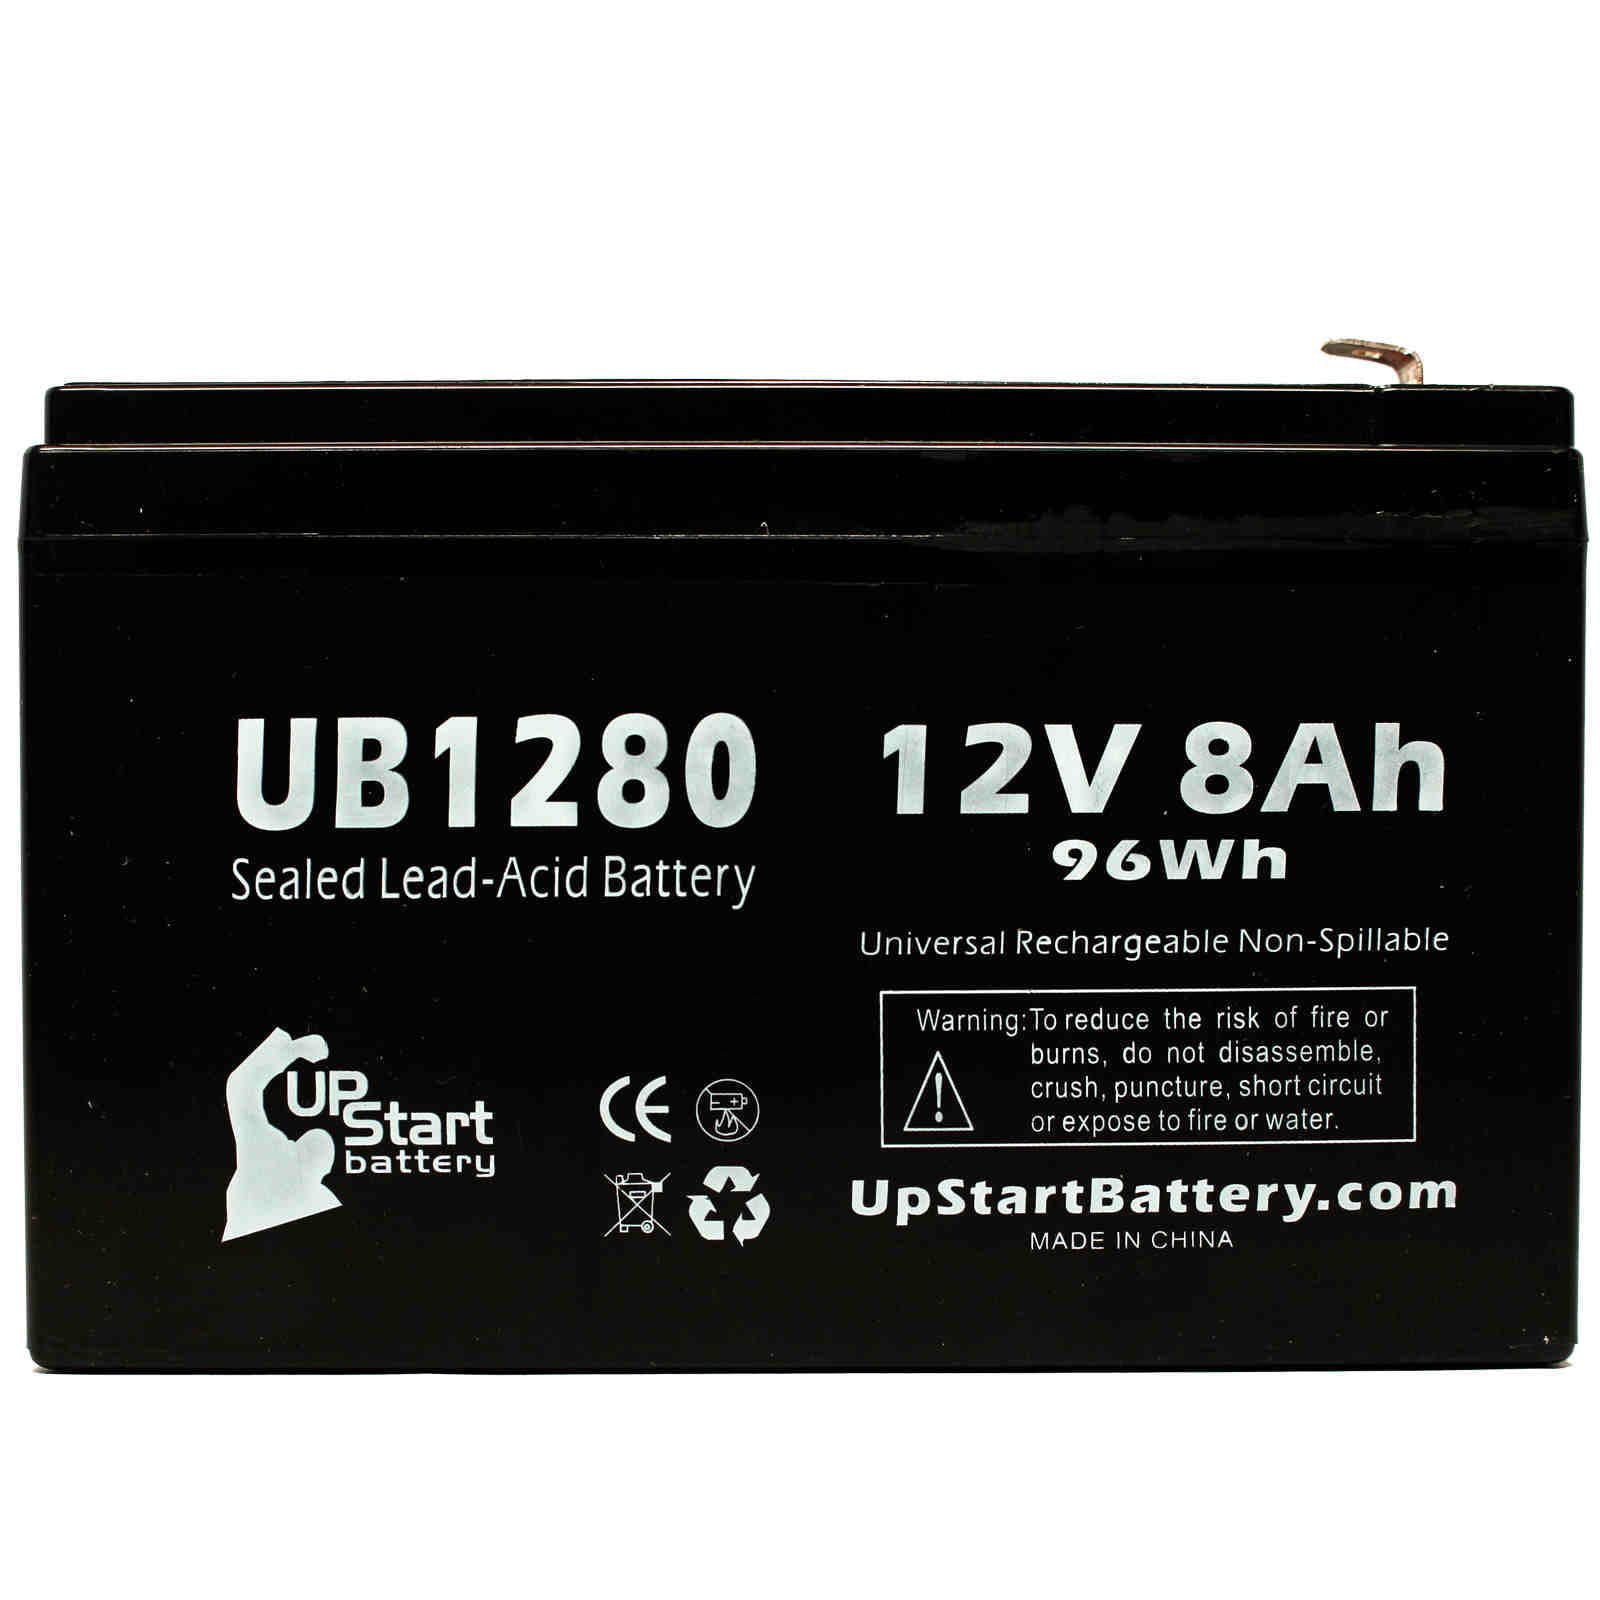 OFFICE POWER AVR 800AVR 12V 7Ah UPS Battery .This is an AJC Brand174 Replacement